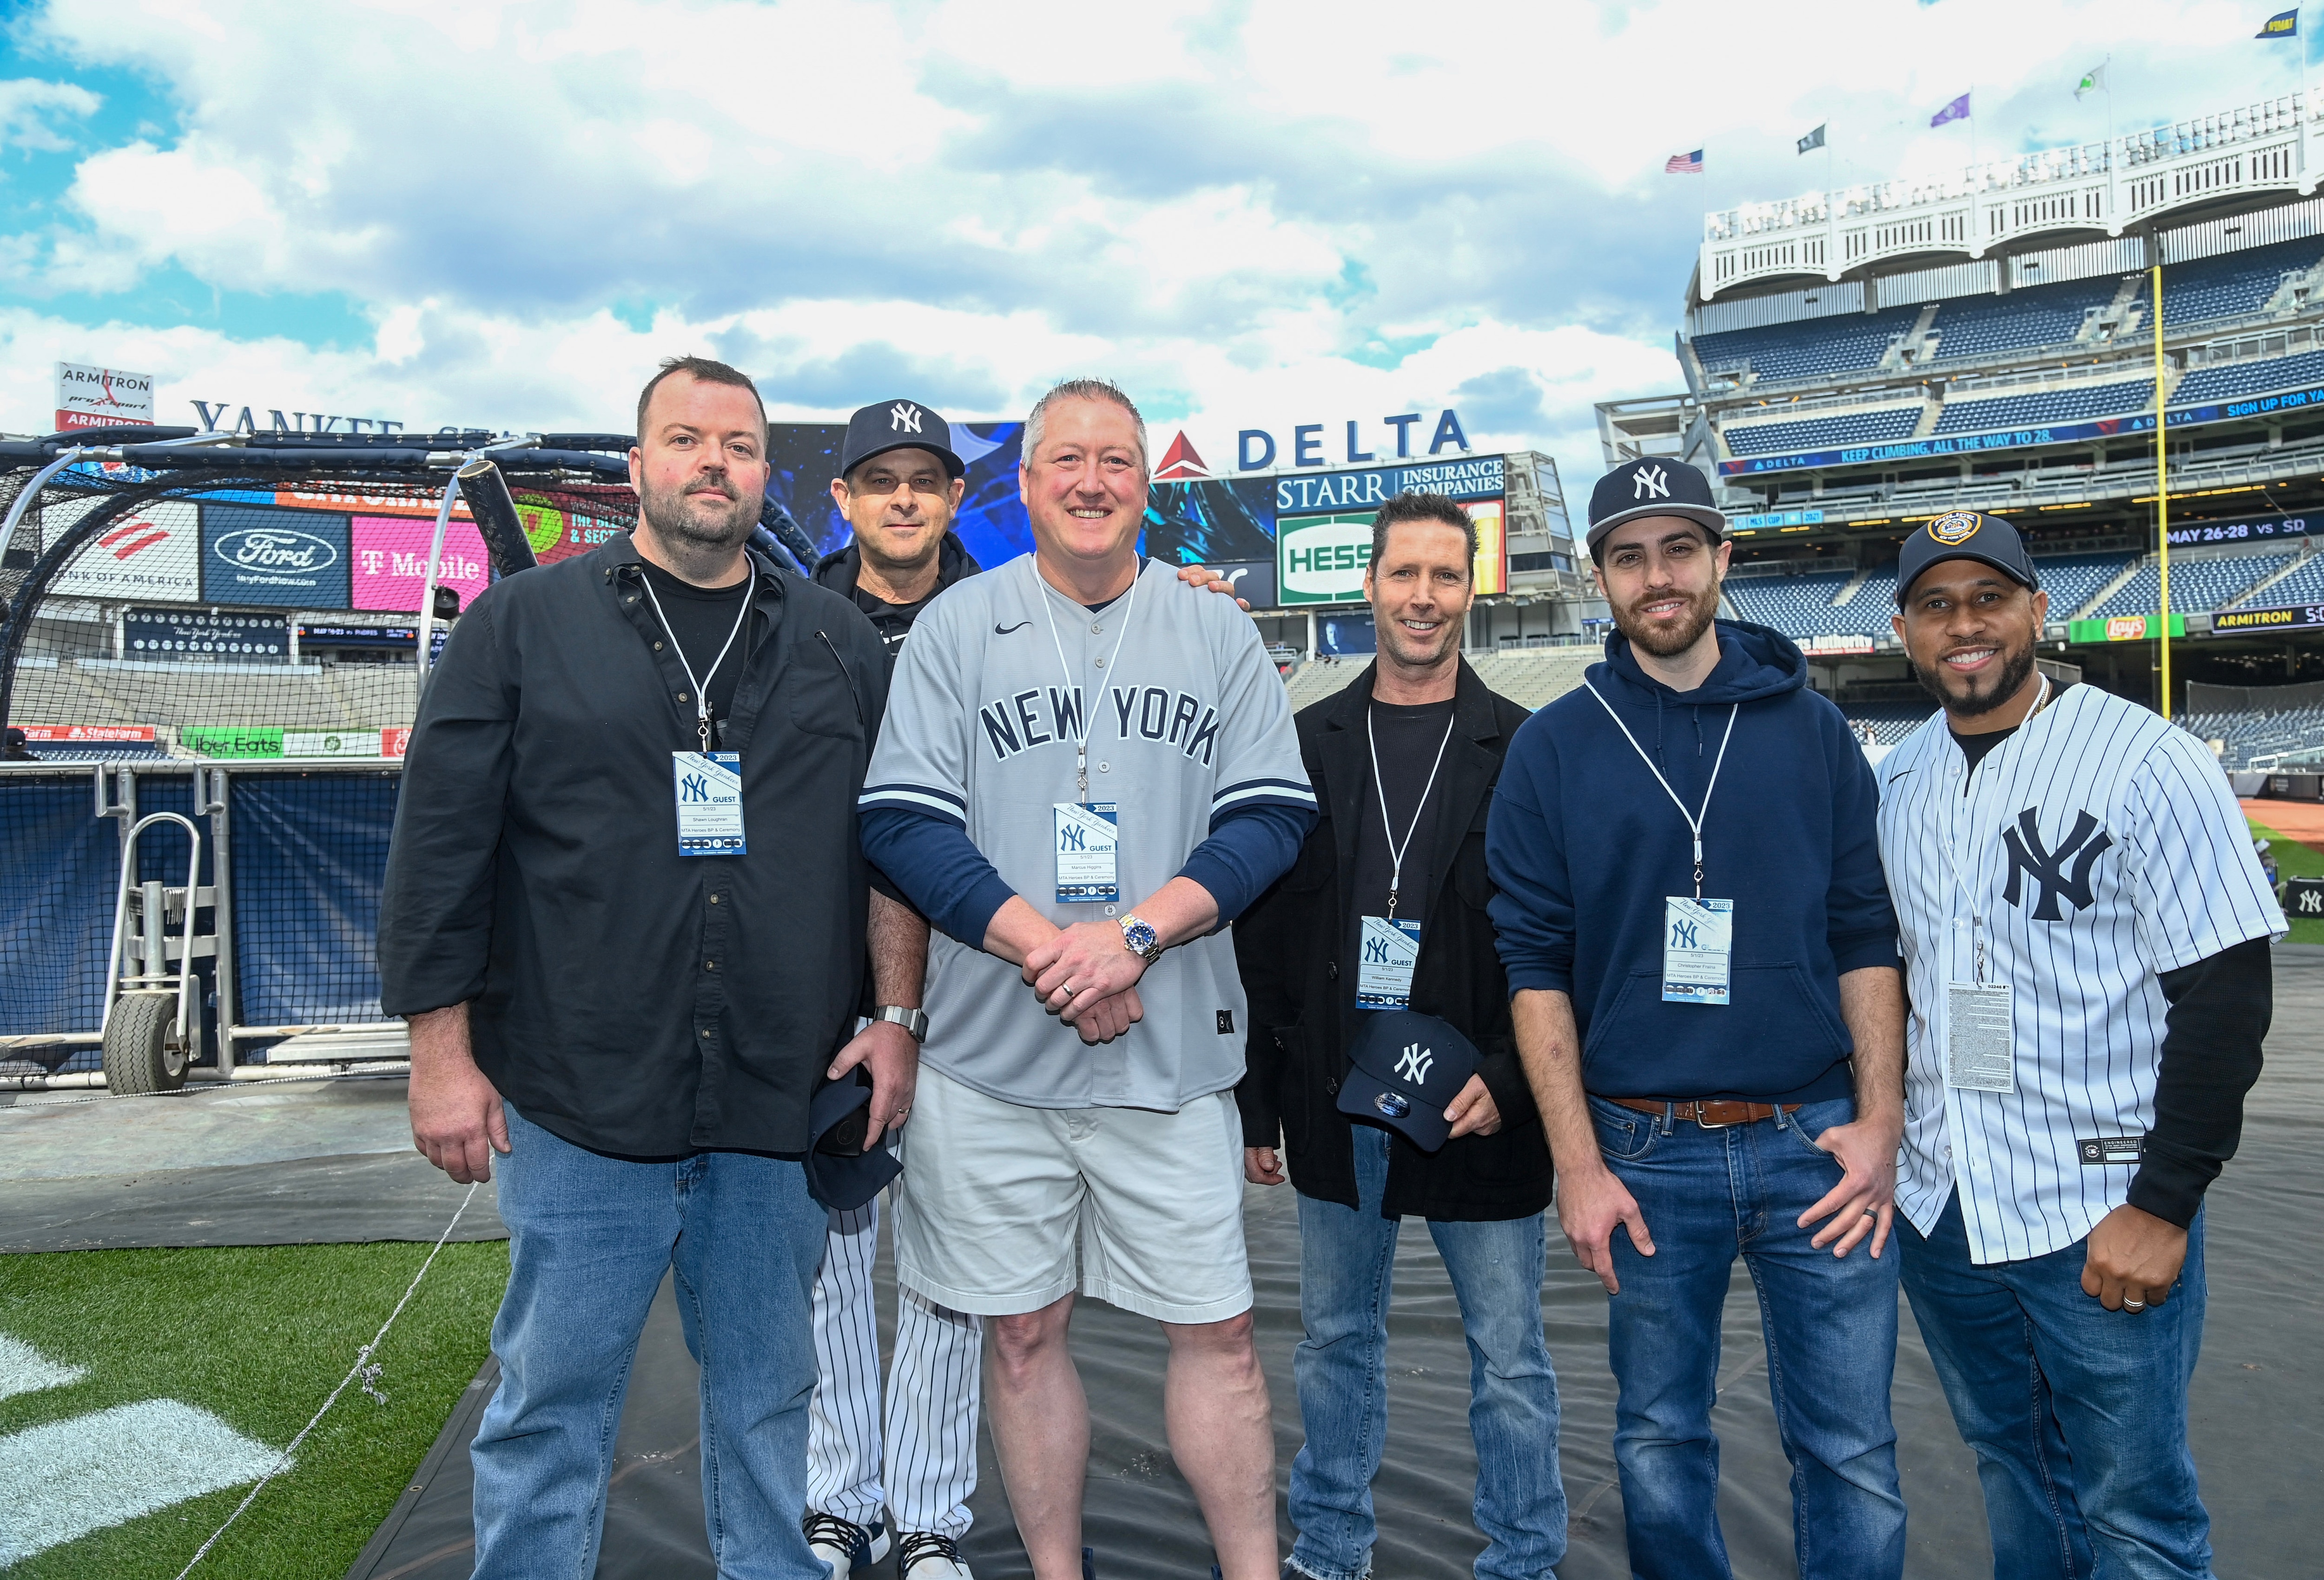 PHOTOS: New York Yankees Honor Metro-North Employees Who Rescued Child Who Fell on Train Tracks 